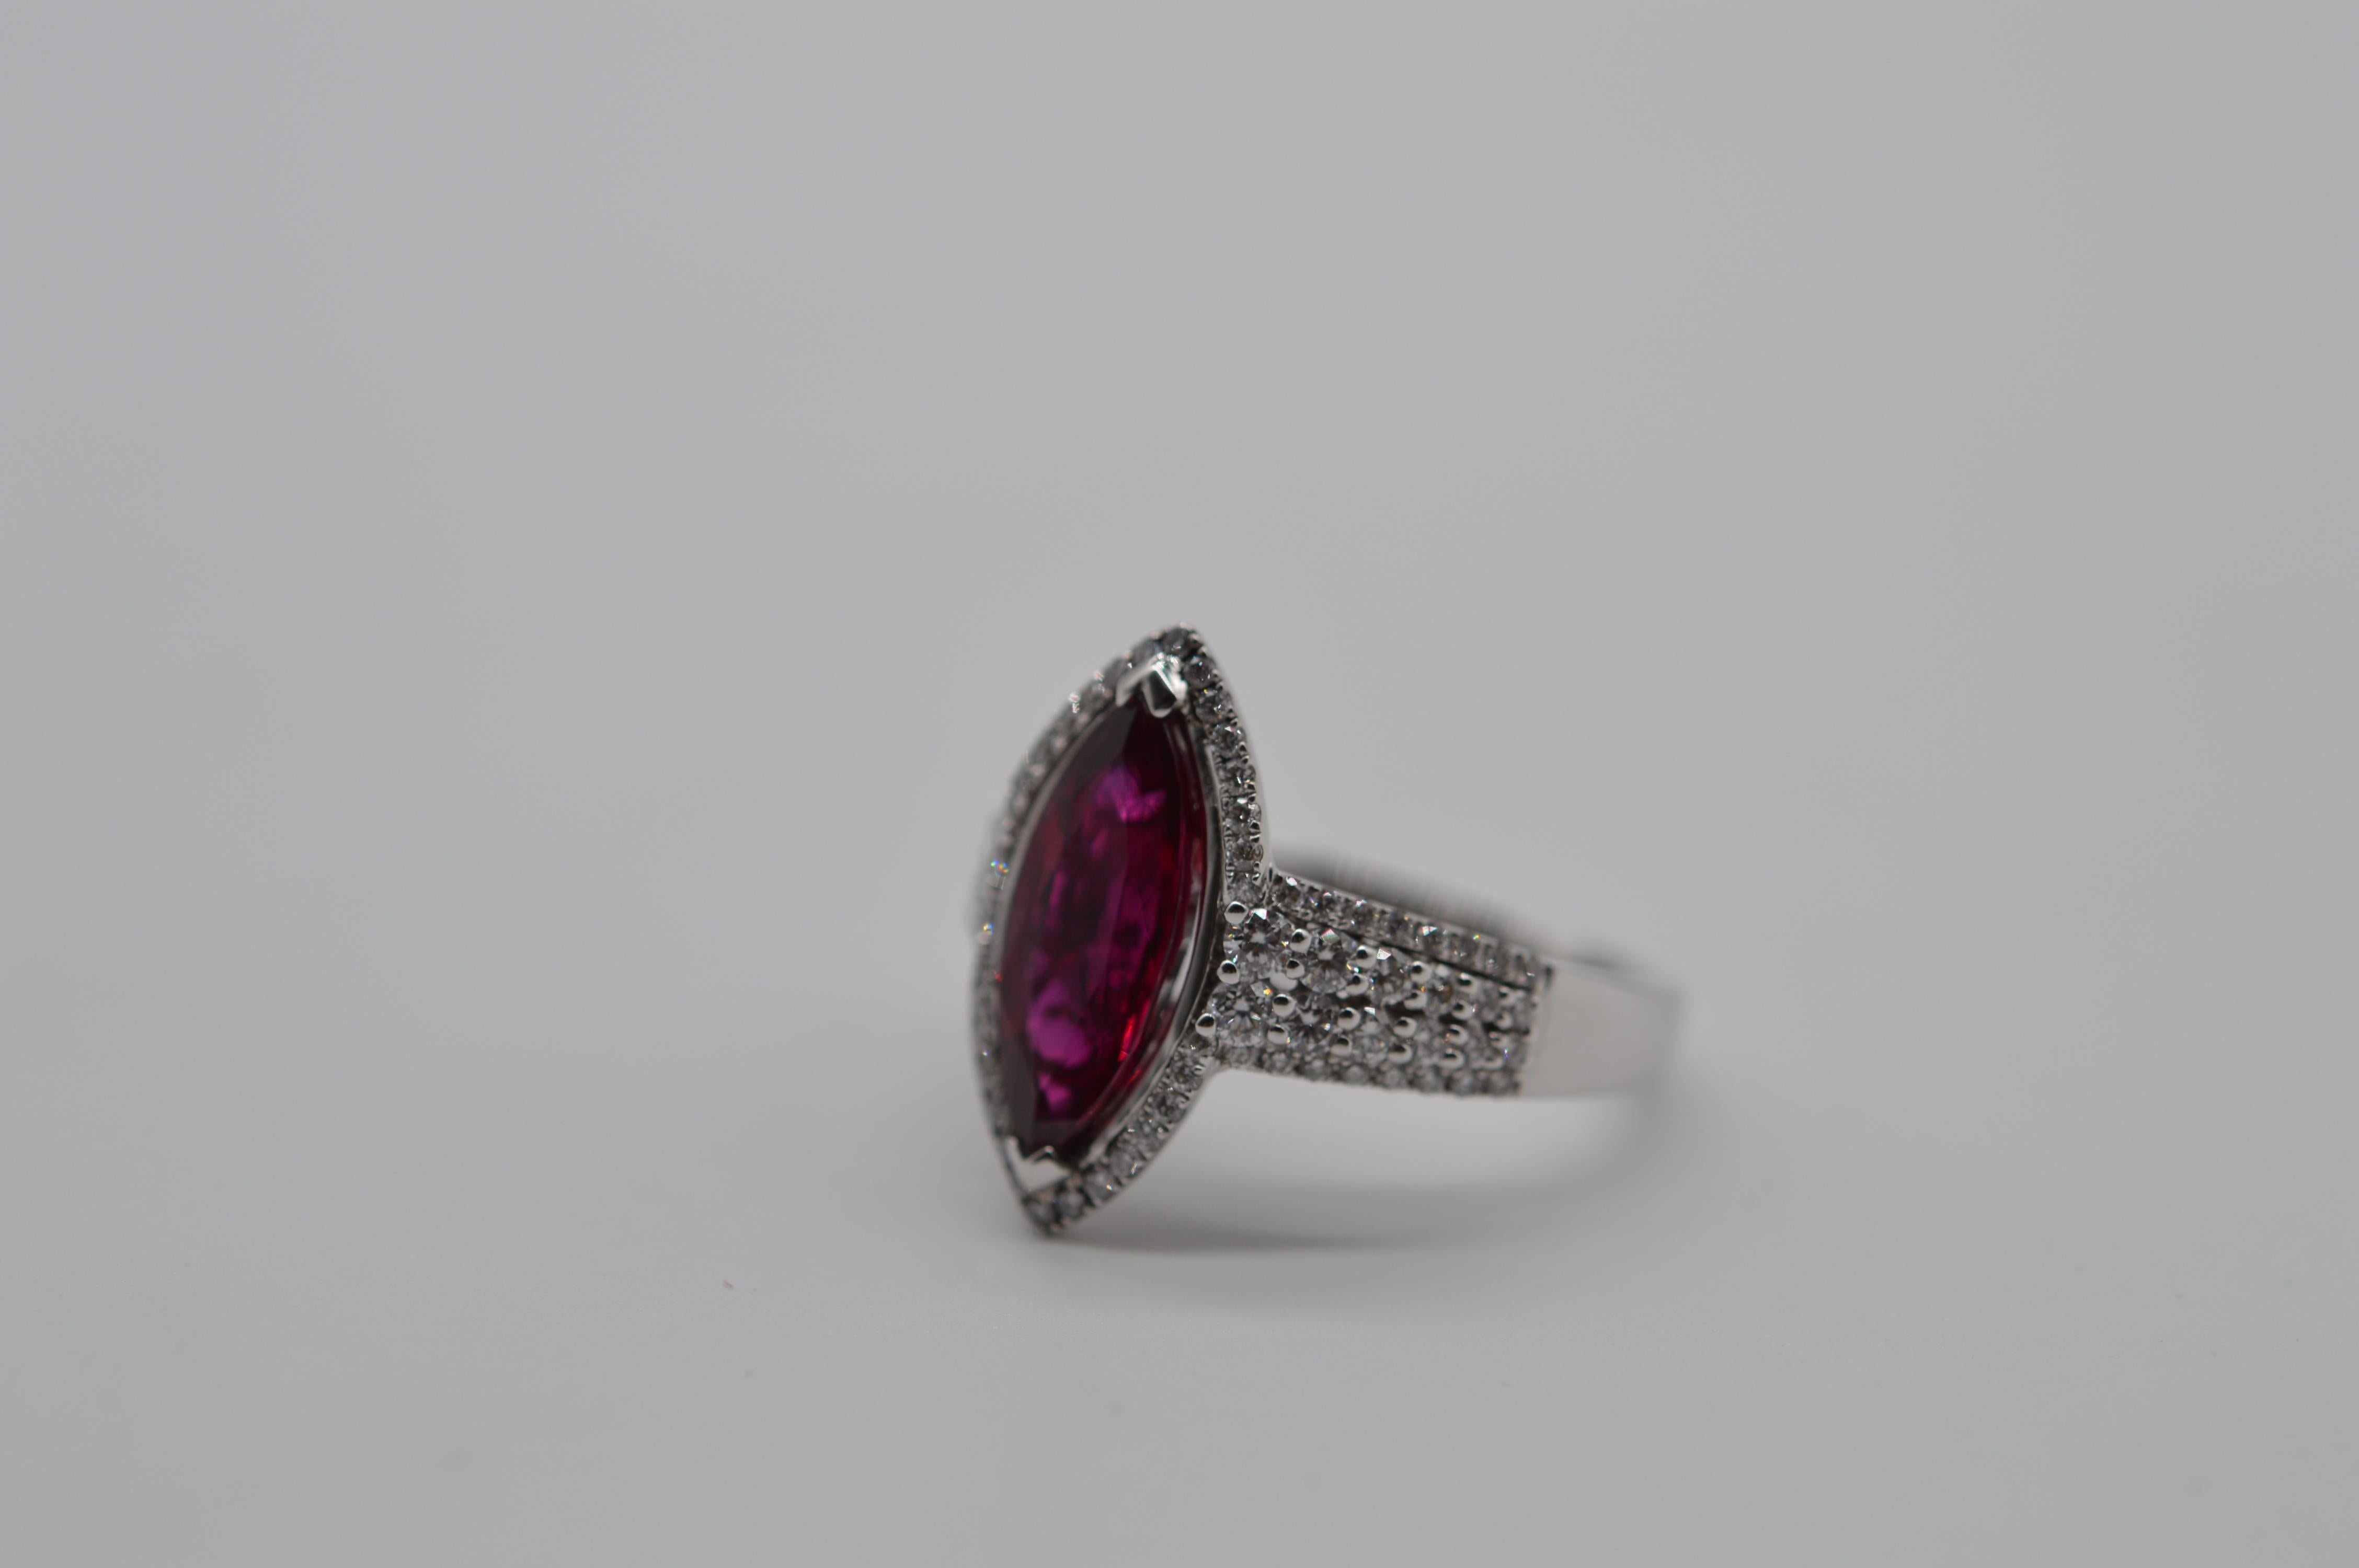 Marquise Cut Siam Marquise Ruby Ring 2.95 Cts Heated C.Dunaigre Certified Unworn For Sale